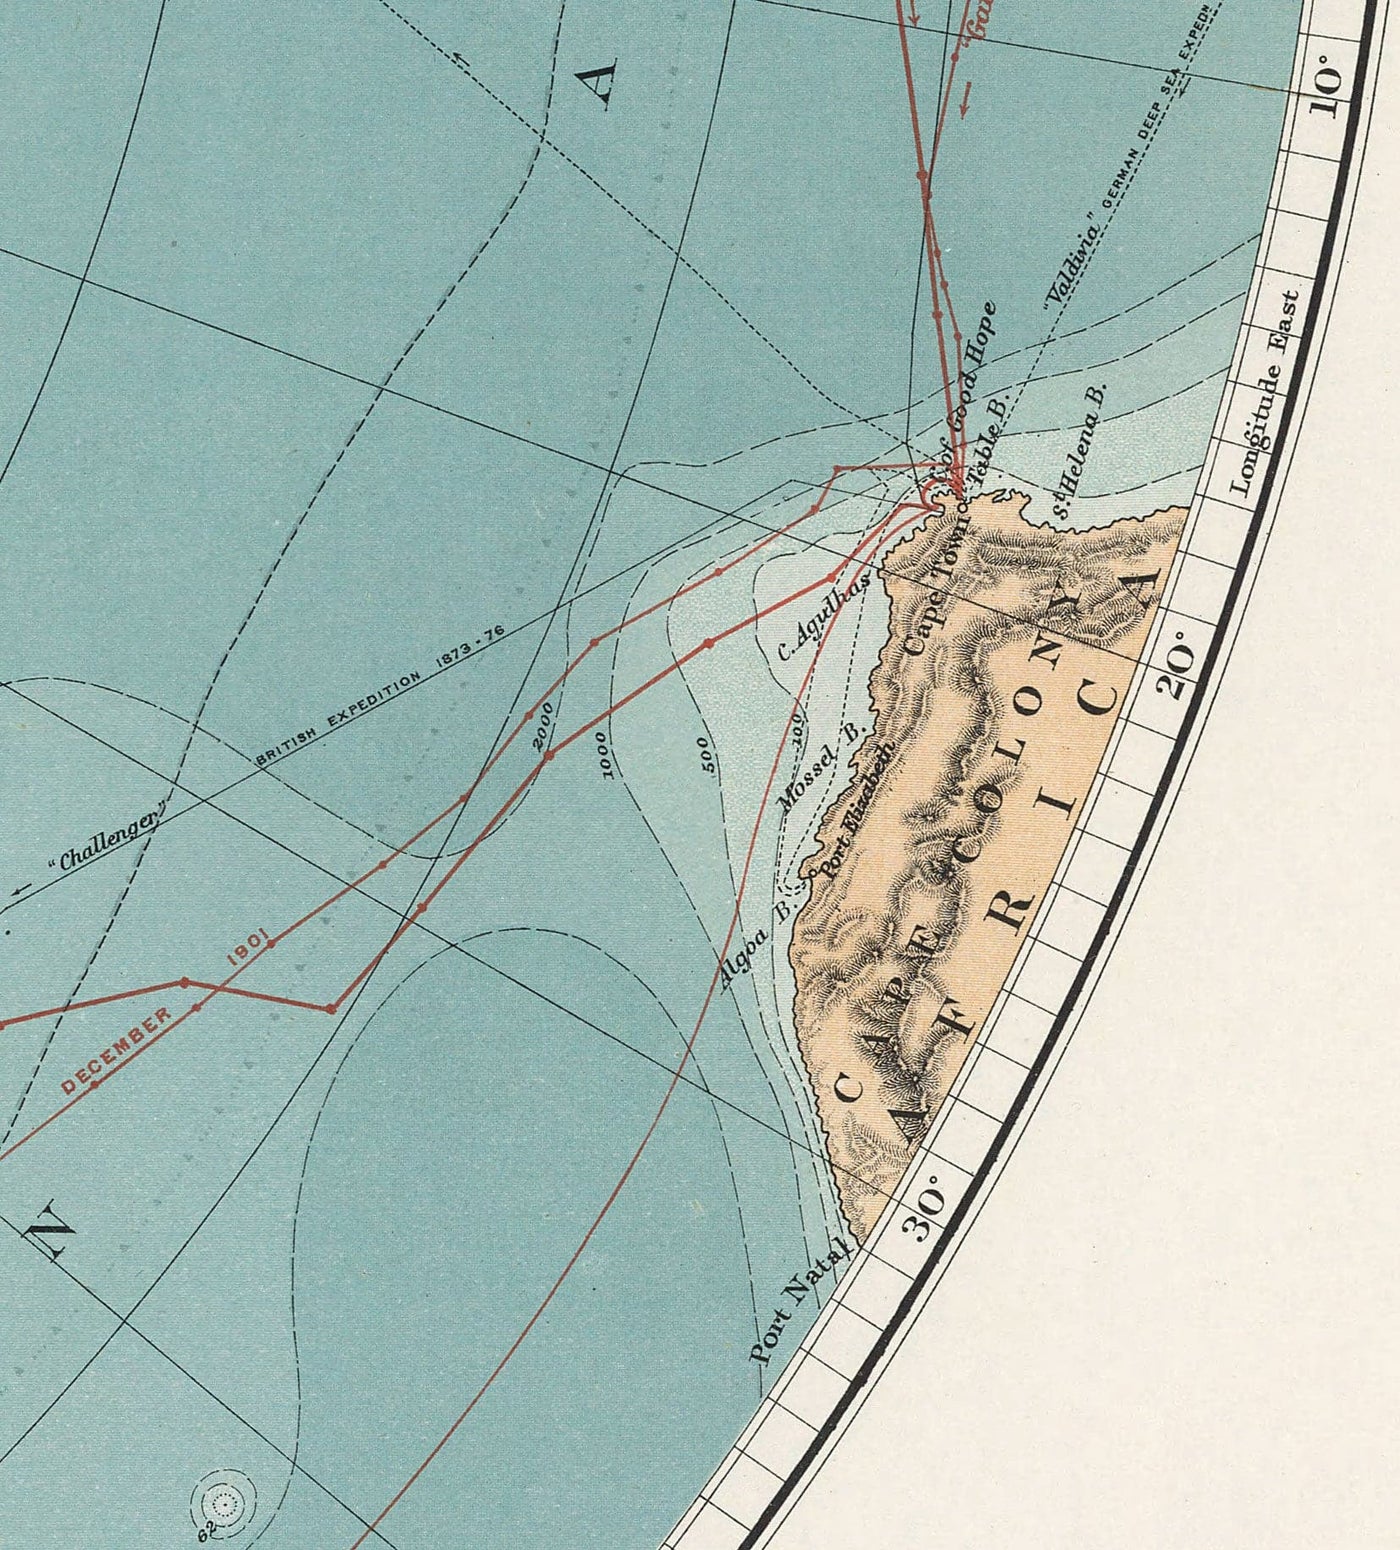 Old Antarctica South Pole Map 1904 by Stanford - Vintage Atlas Explorer Map of the Antarctic